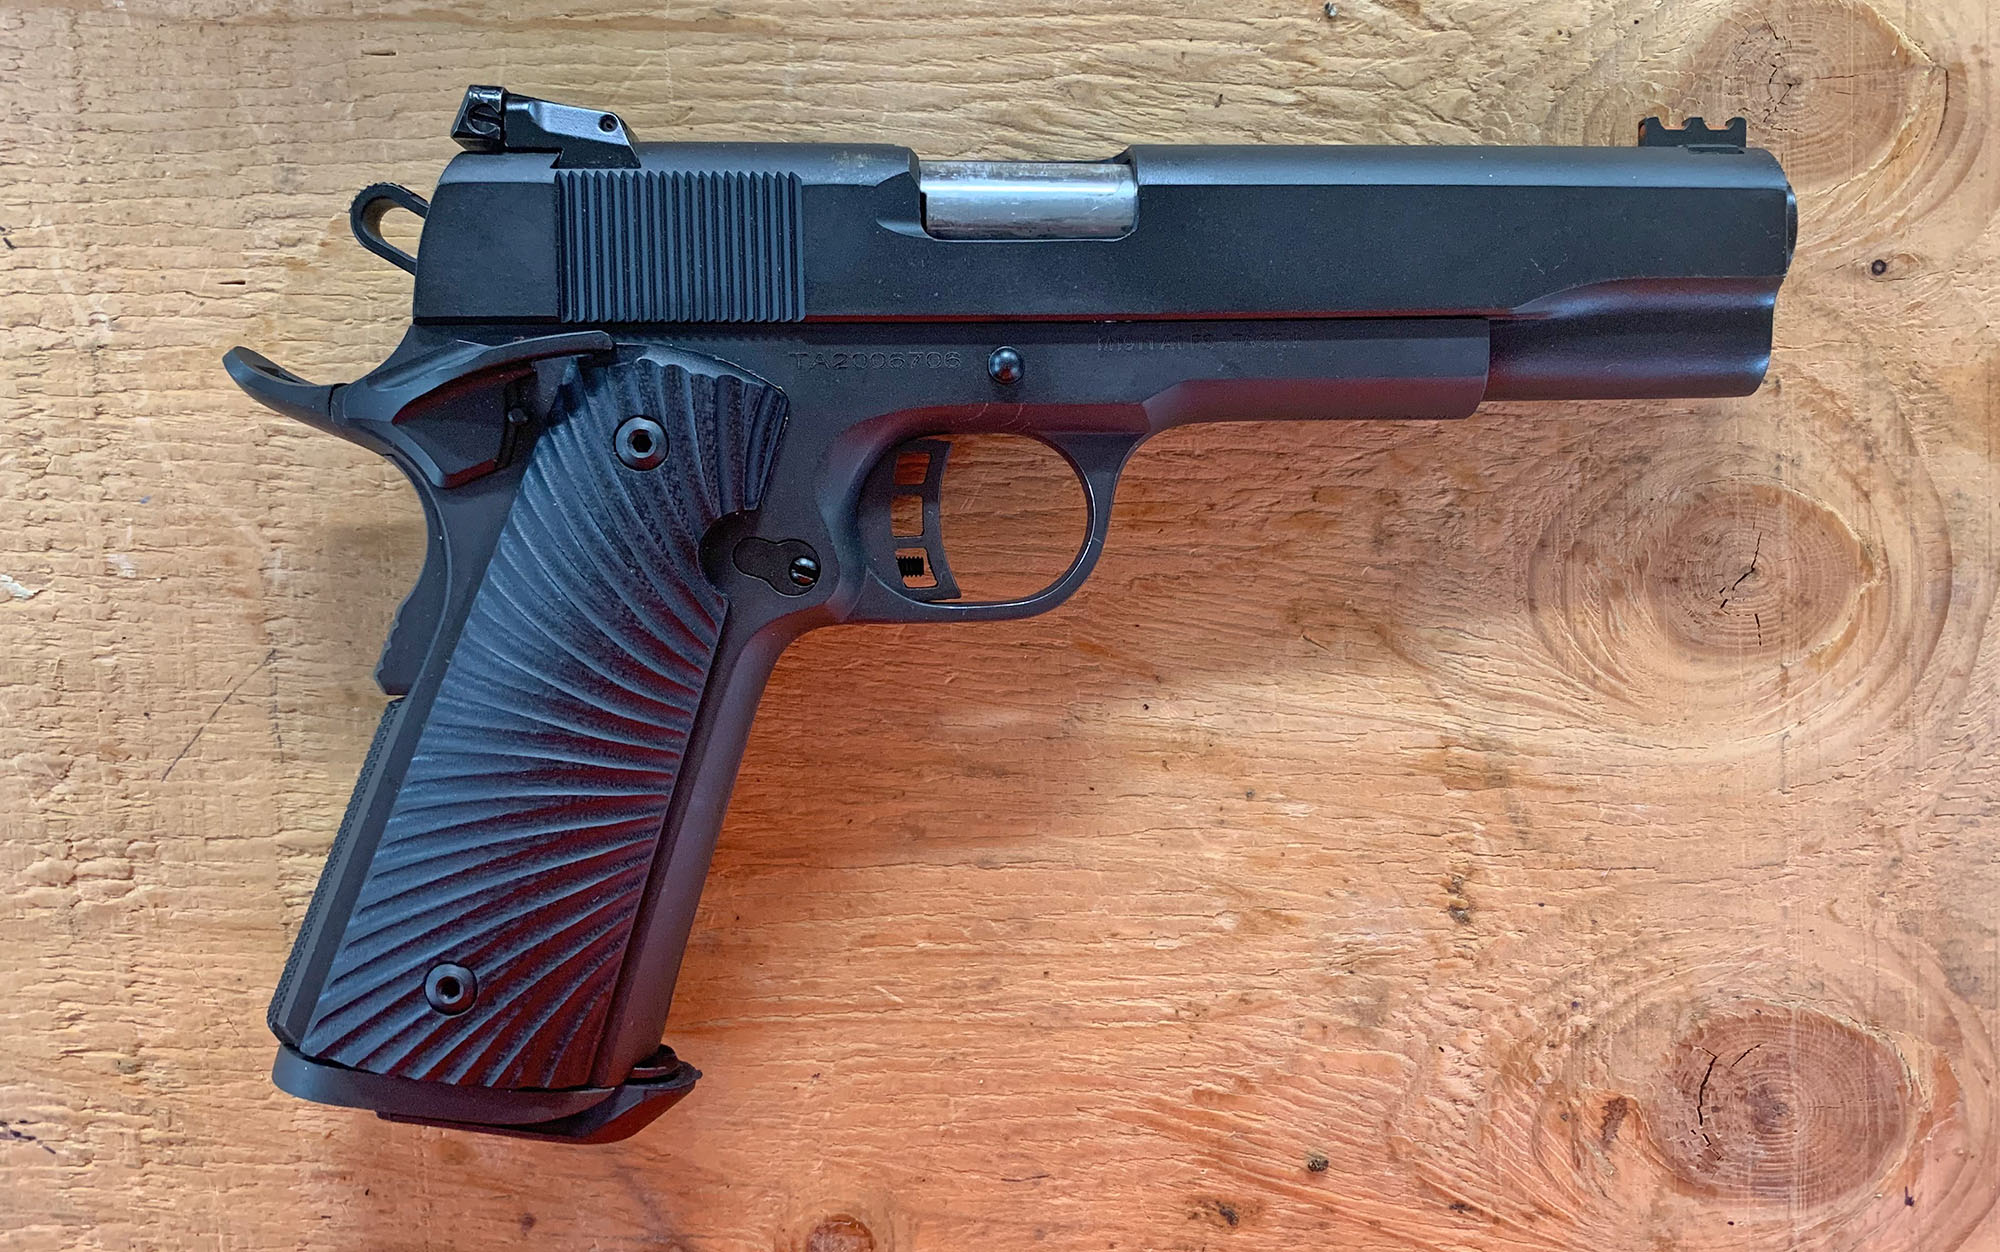 We tested the Taylorâs & Co. 1911 A1 FS Tactical II.